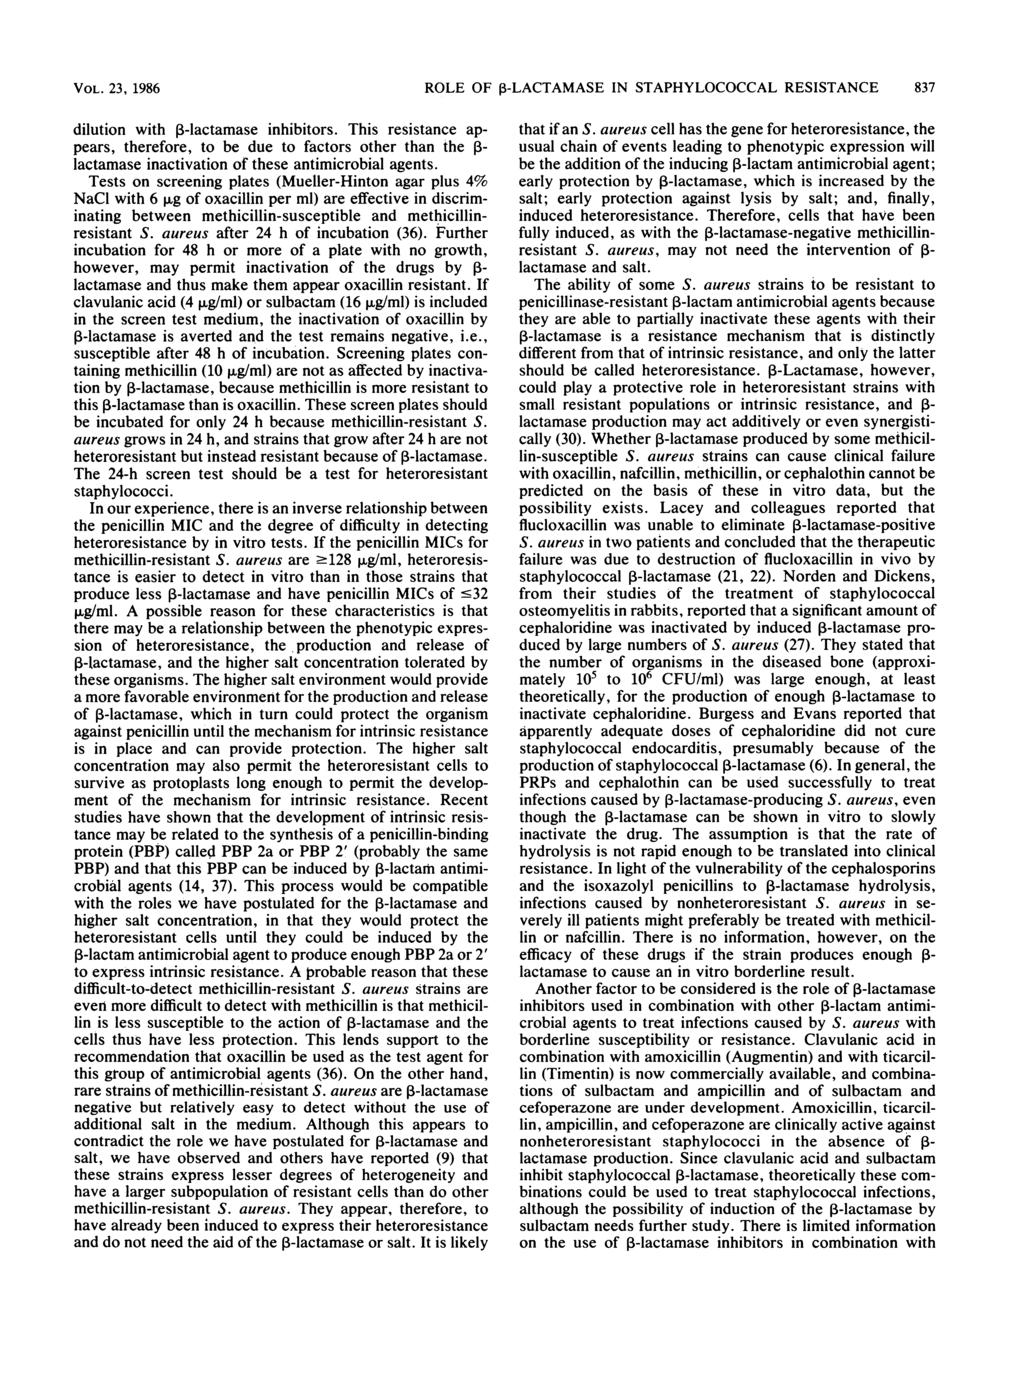 VOL. 23, 1986 ROLE OF P-LACTAMASE IN STAPHYLOCOCCAL RESISTANCE 837 dilution with P-lactamase inhibitors.